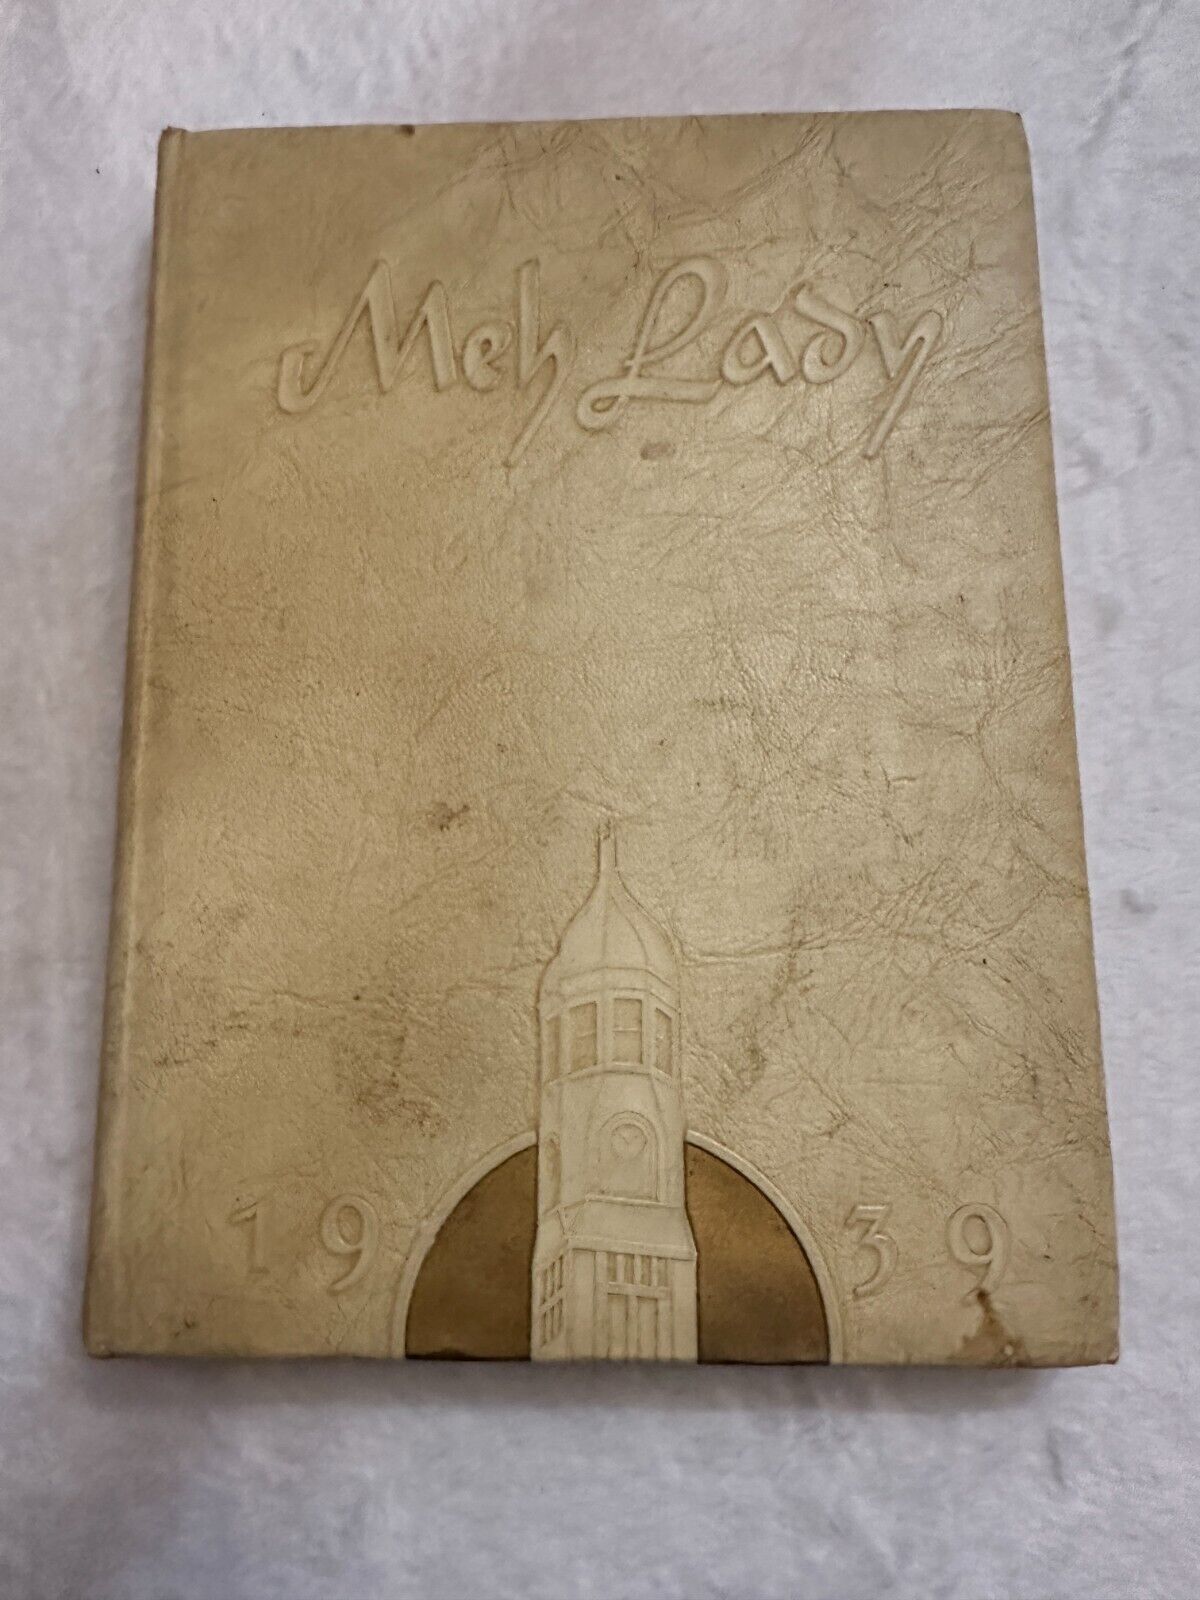 1939 Meh Lady Yearbook - Mississippi State College for Women - MSCW